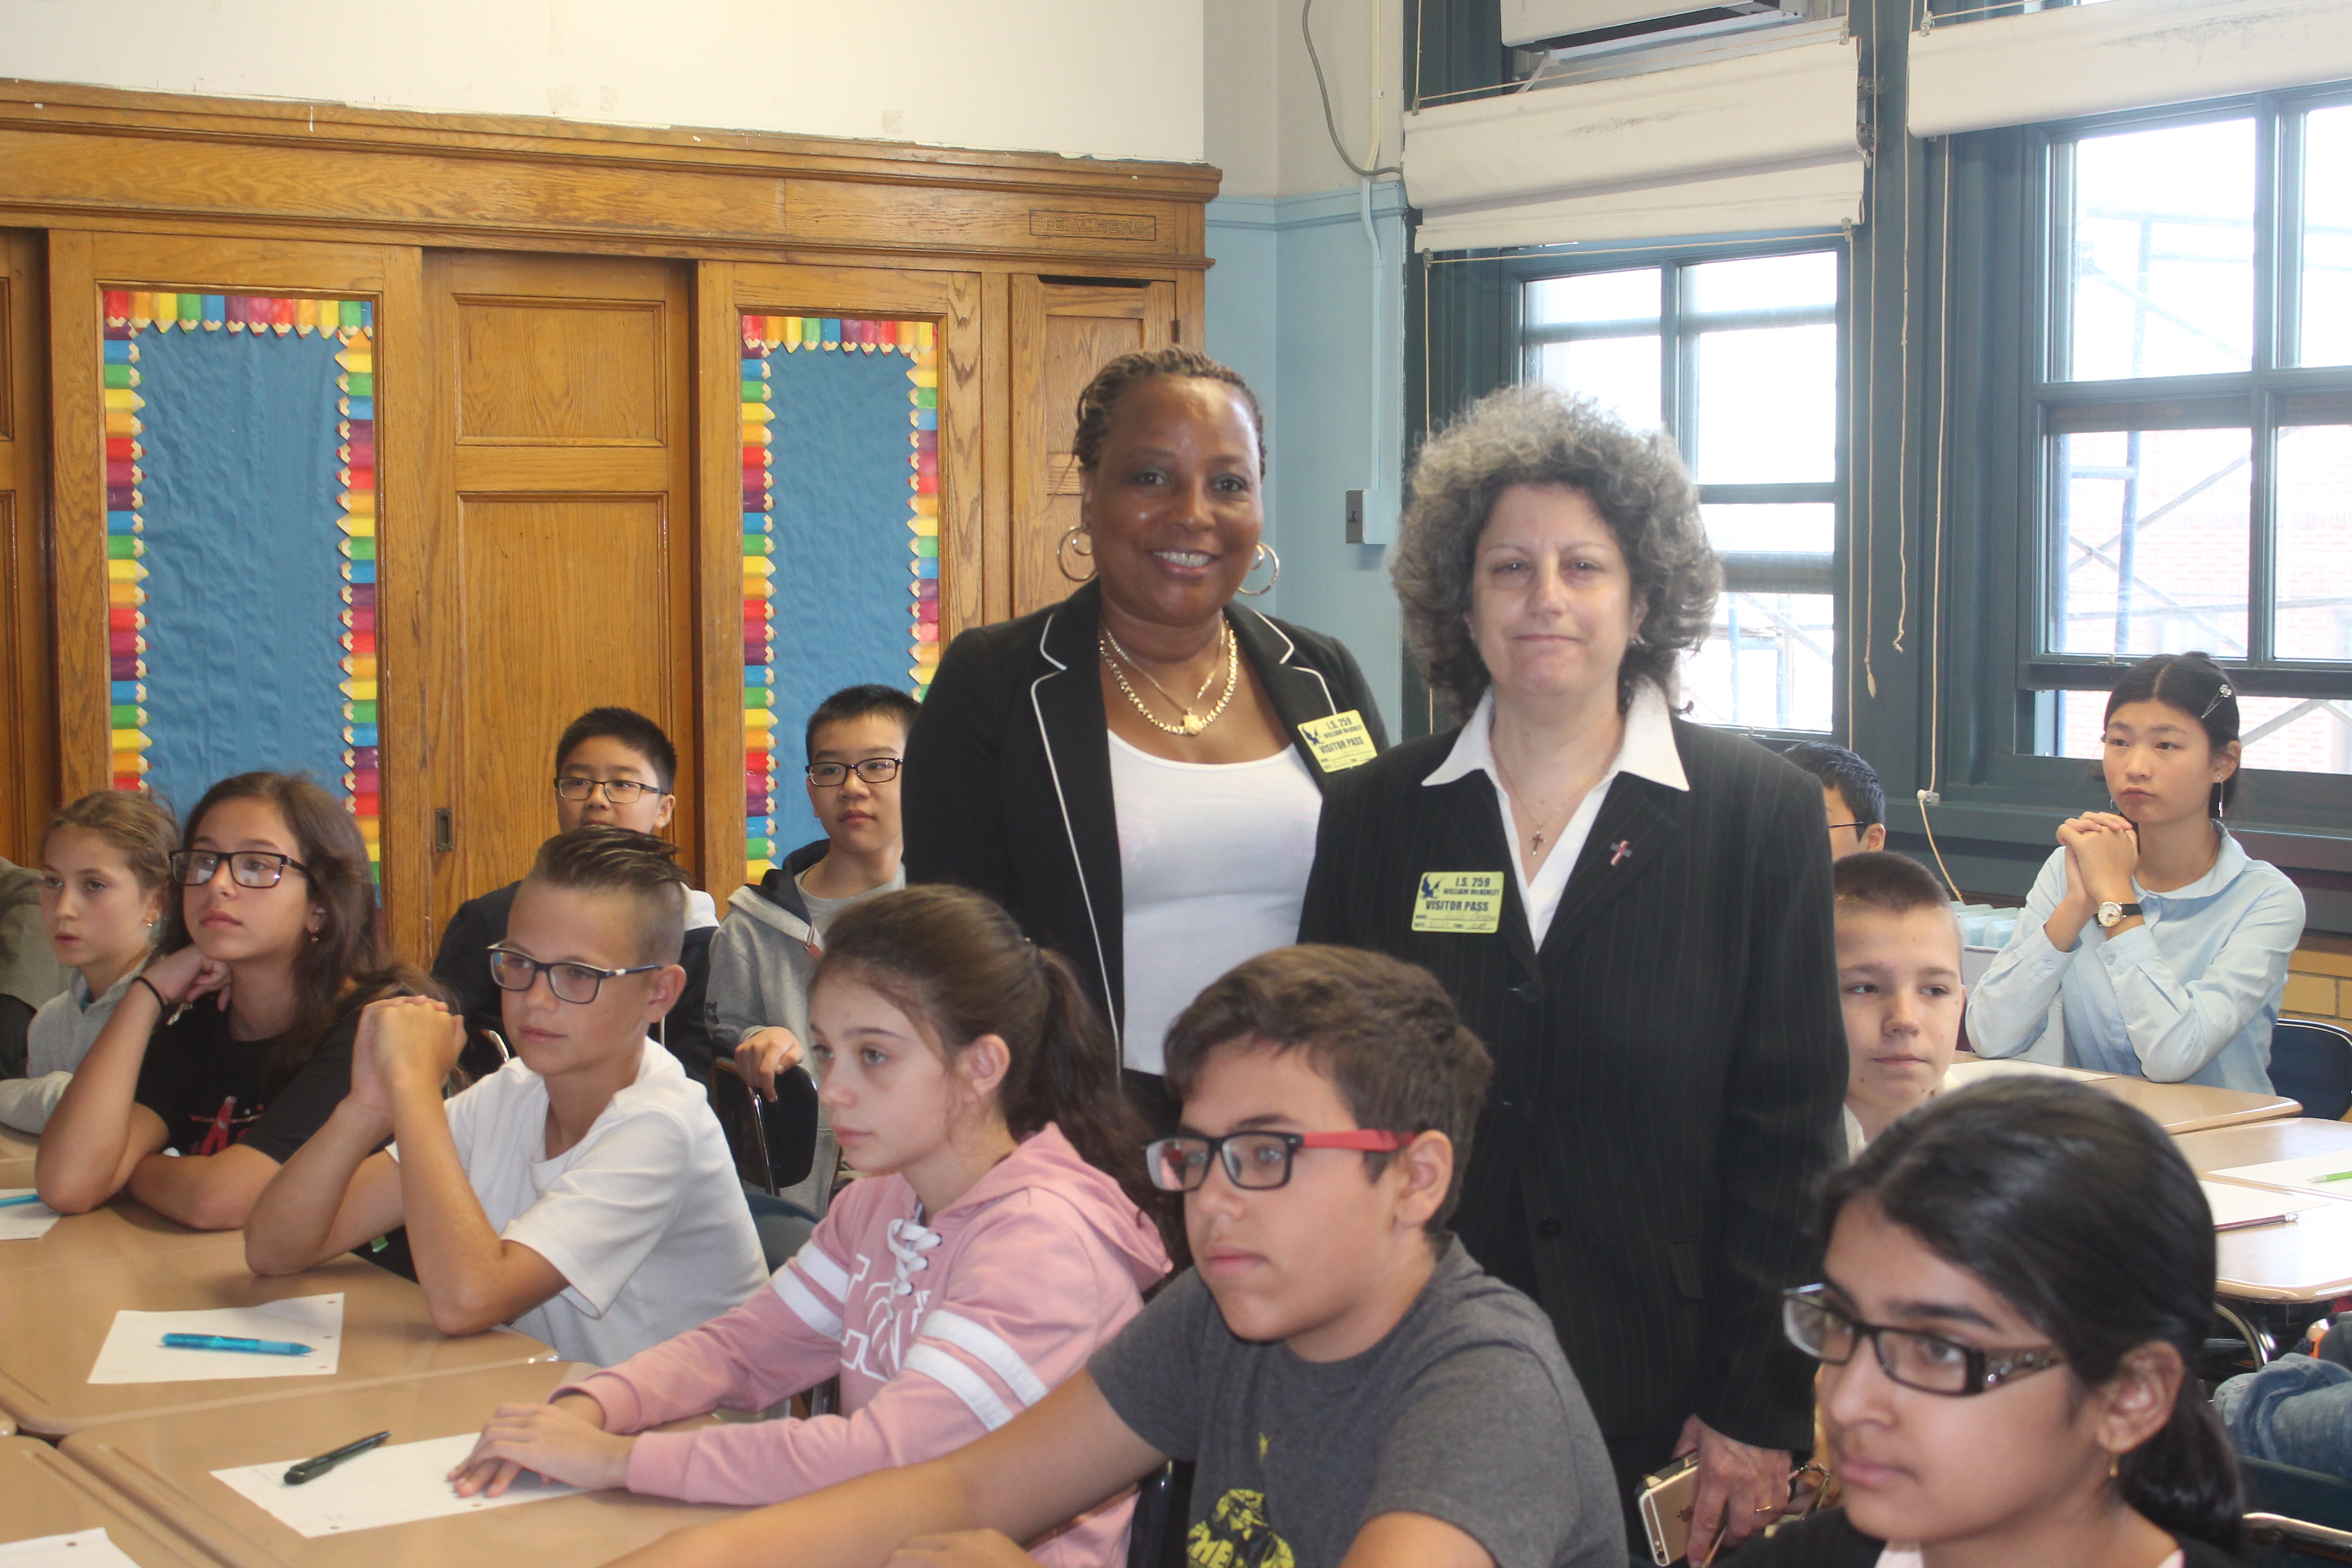 I S 259 Commemorates 9 11 With Speaker Tour Of School S Memorial The Brooklyn Home Reporter